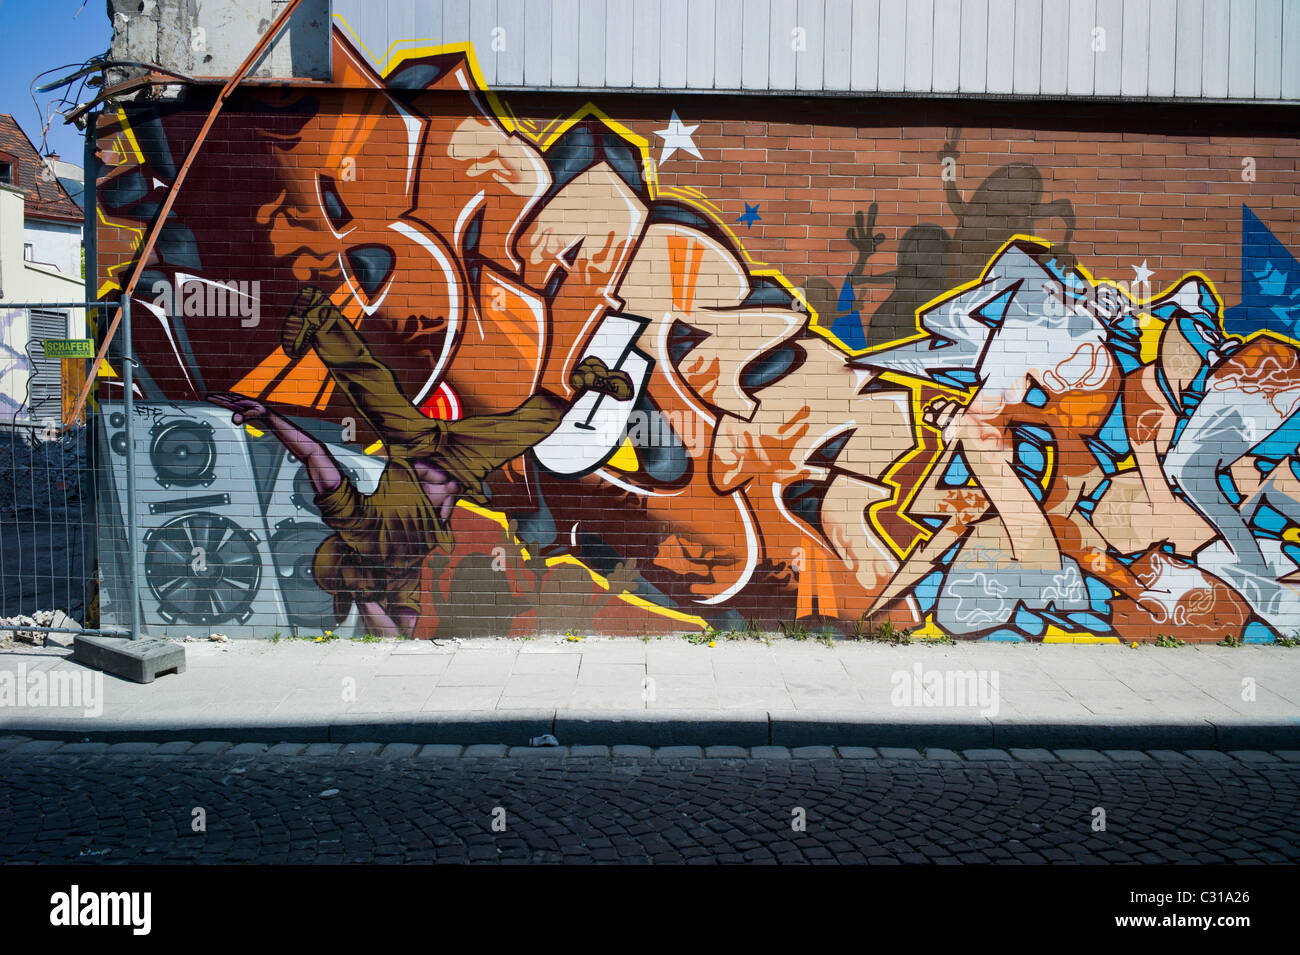 Artful graffiti on a long brick wall in Munich-Giesing showing a colorful tag and different elements of hip hop culture, Germany Stock Photo